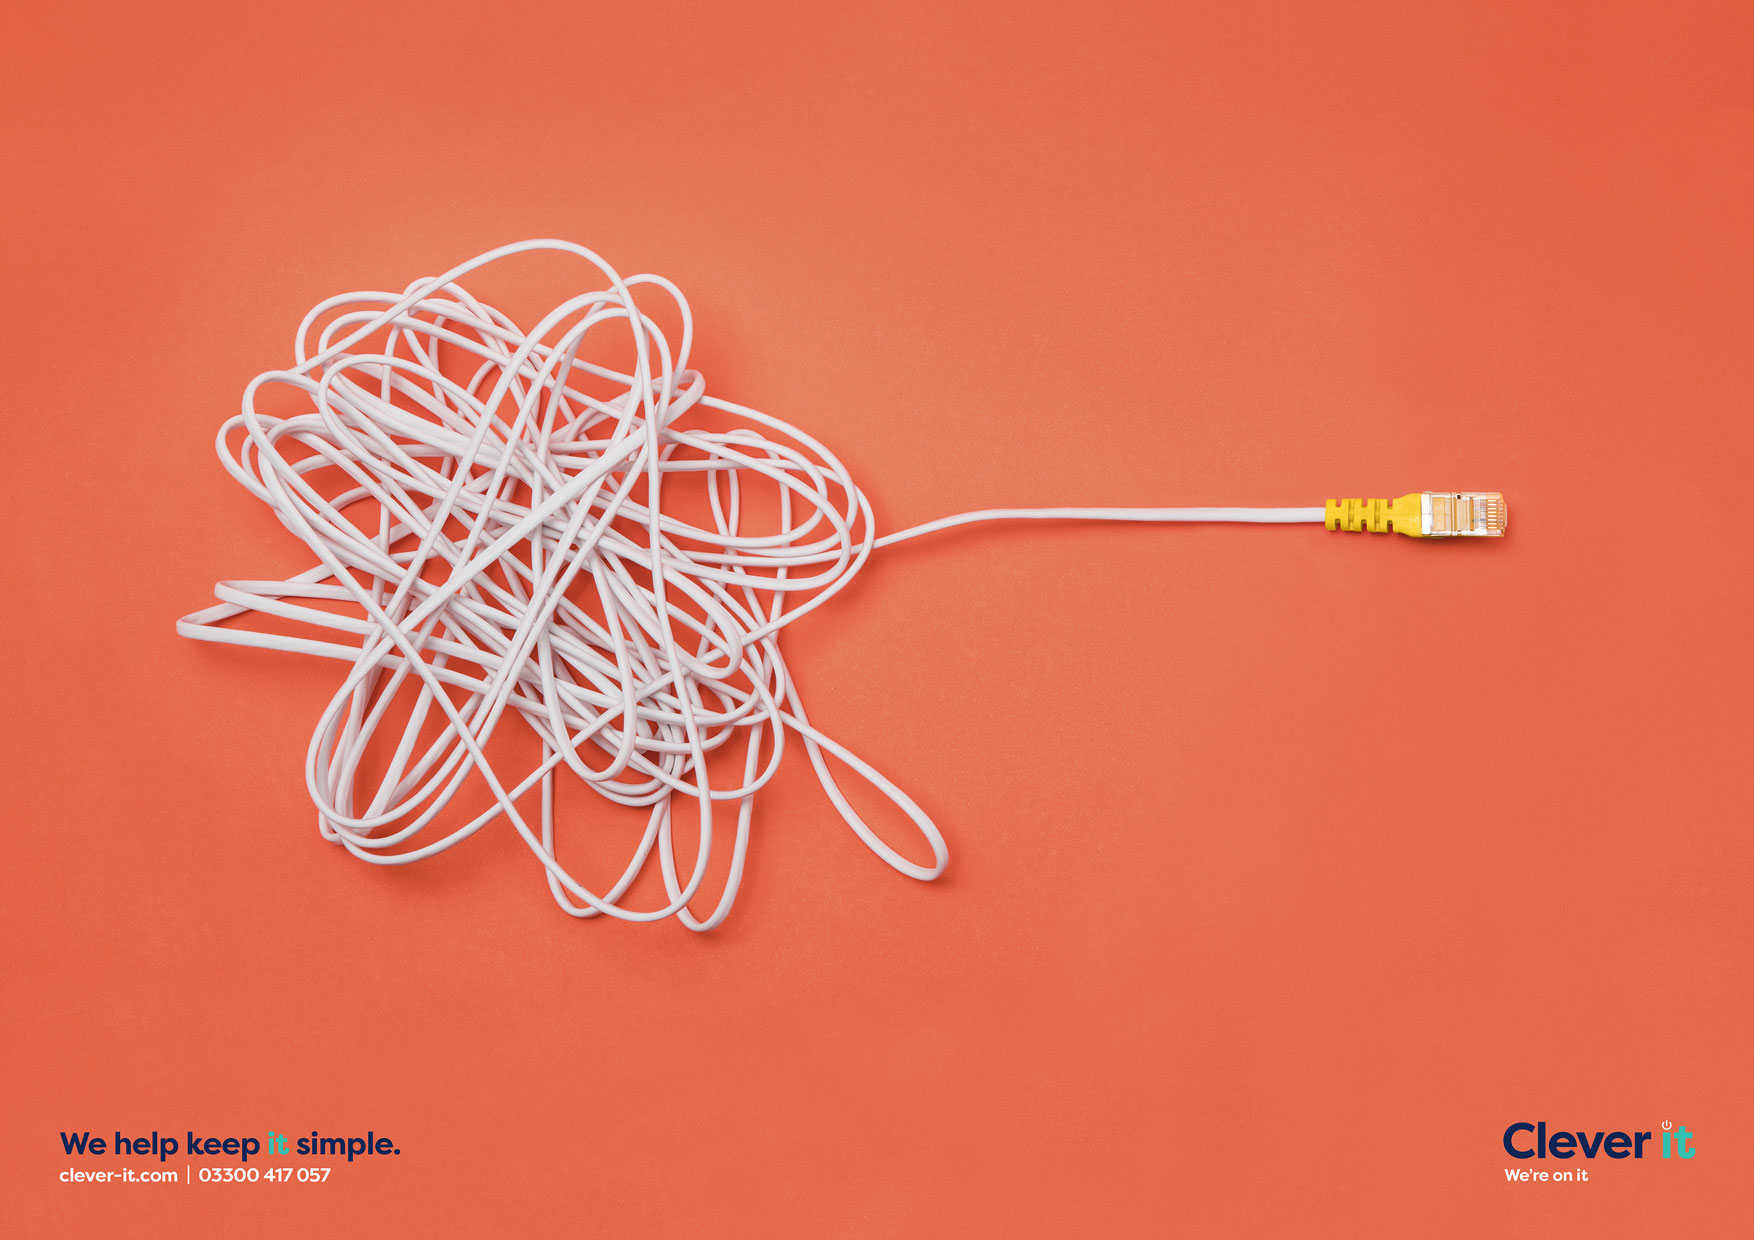 Clever IT – Wire Poster